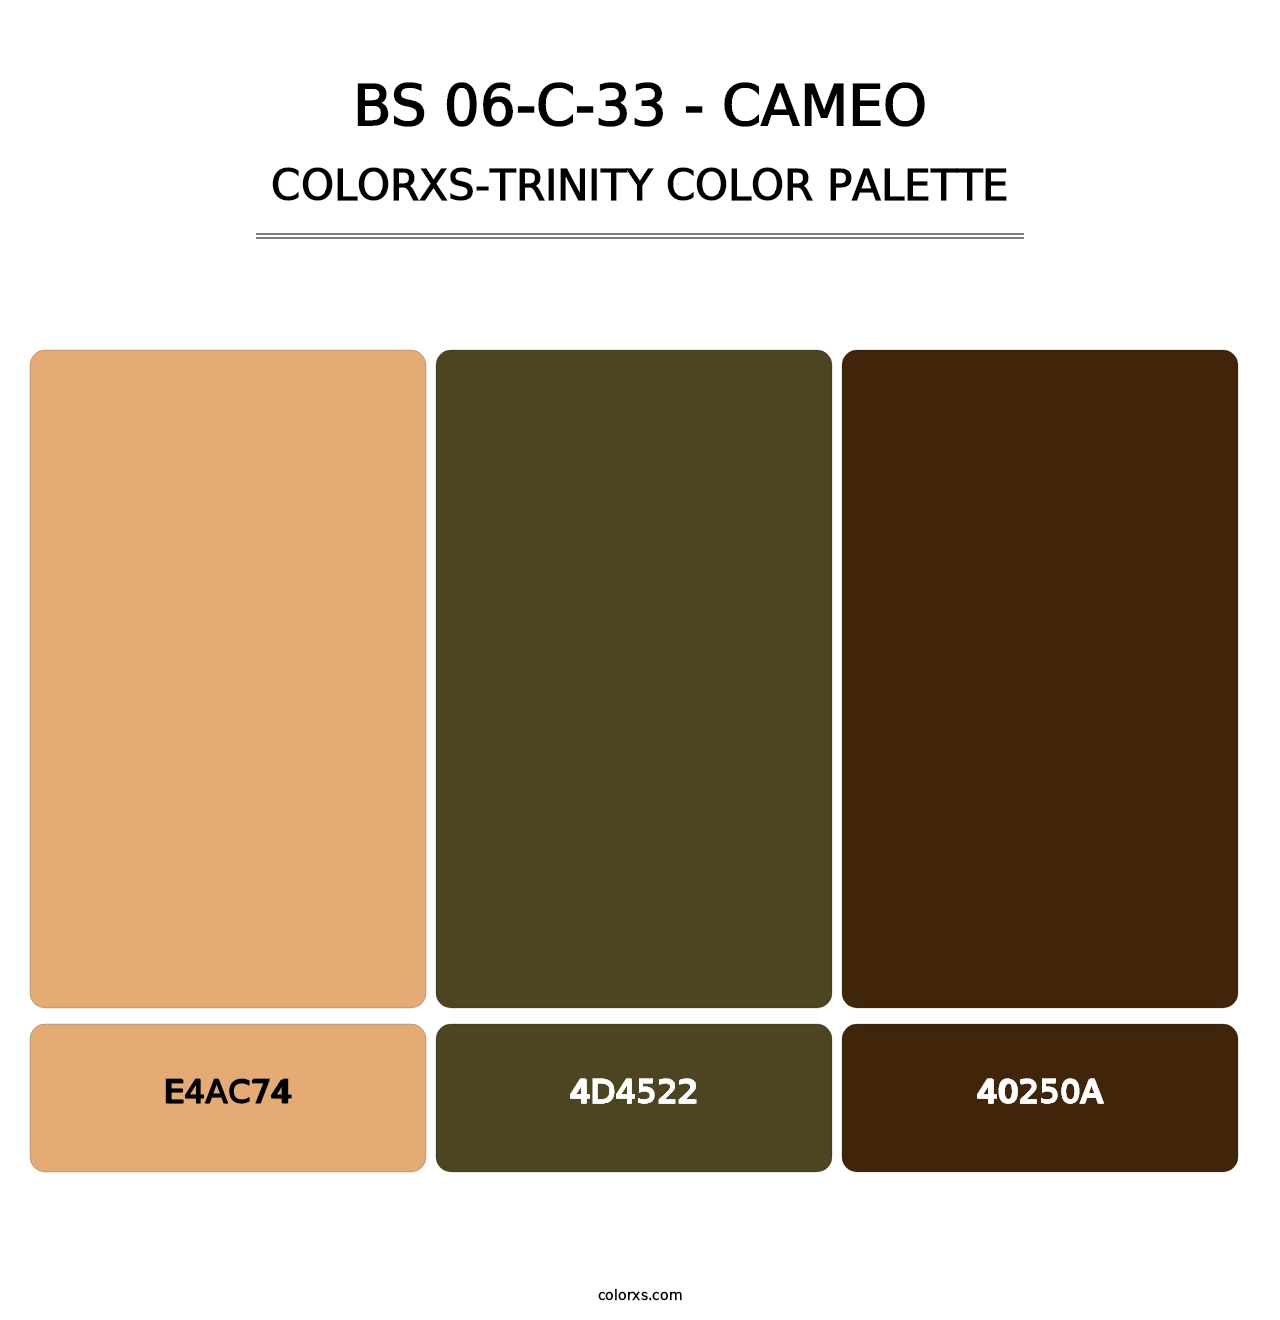 BS 06-C-33 - Cameo - Colorxs Trinity Palette